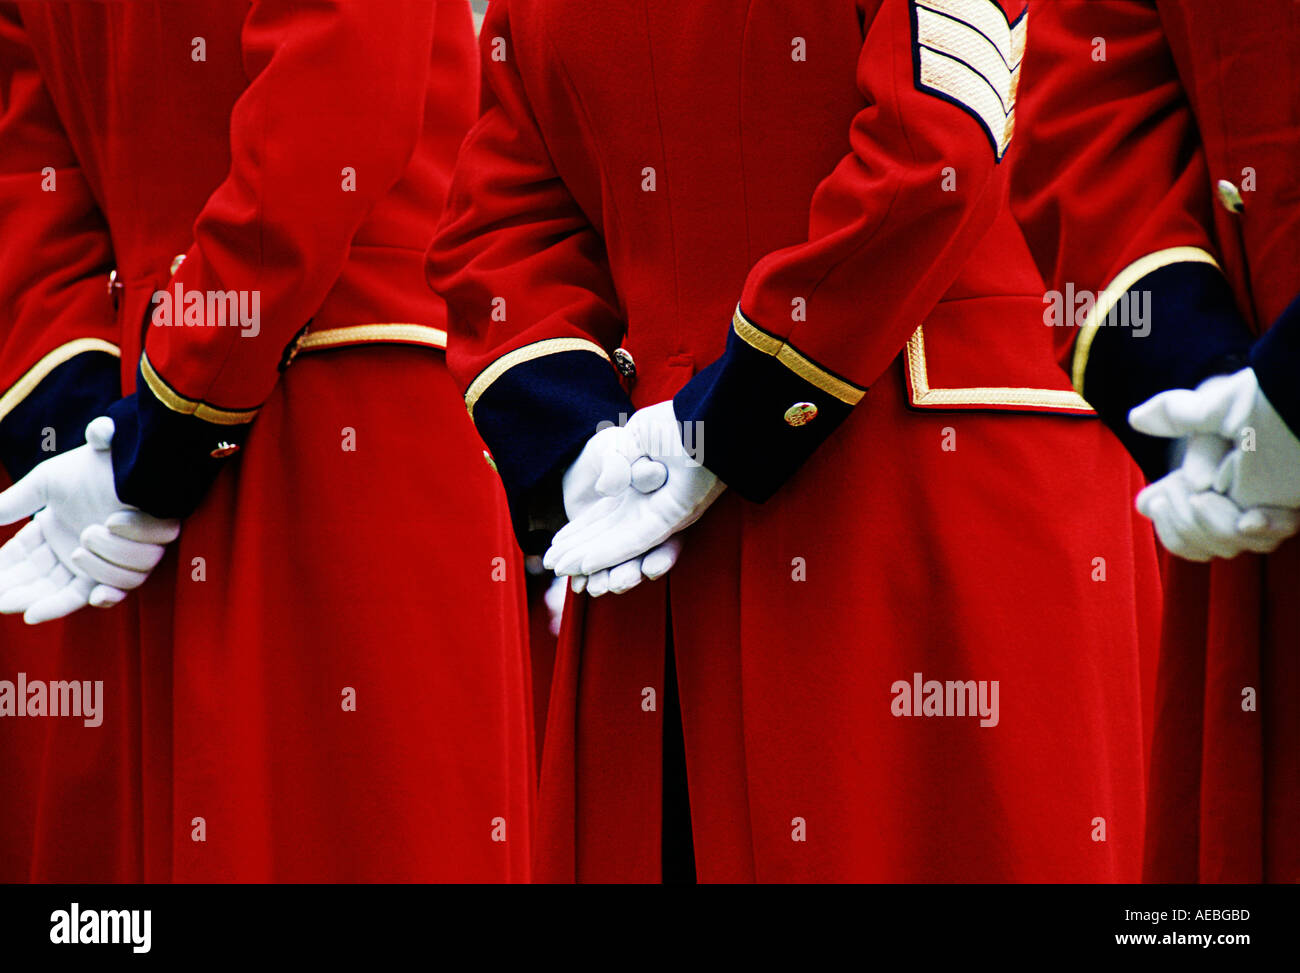 Details of traditional red coat uniforms black cuffs and white gloves of Chelsea Pensioners London Stock Photo